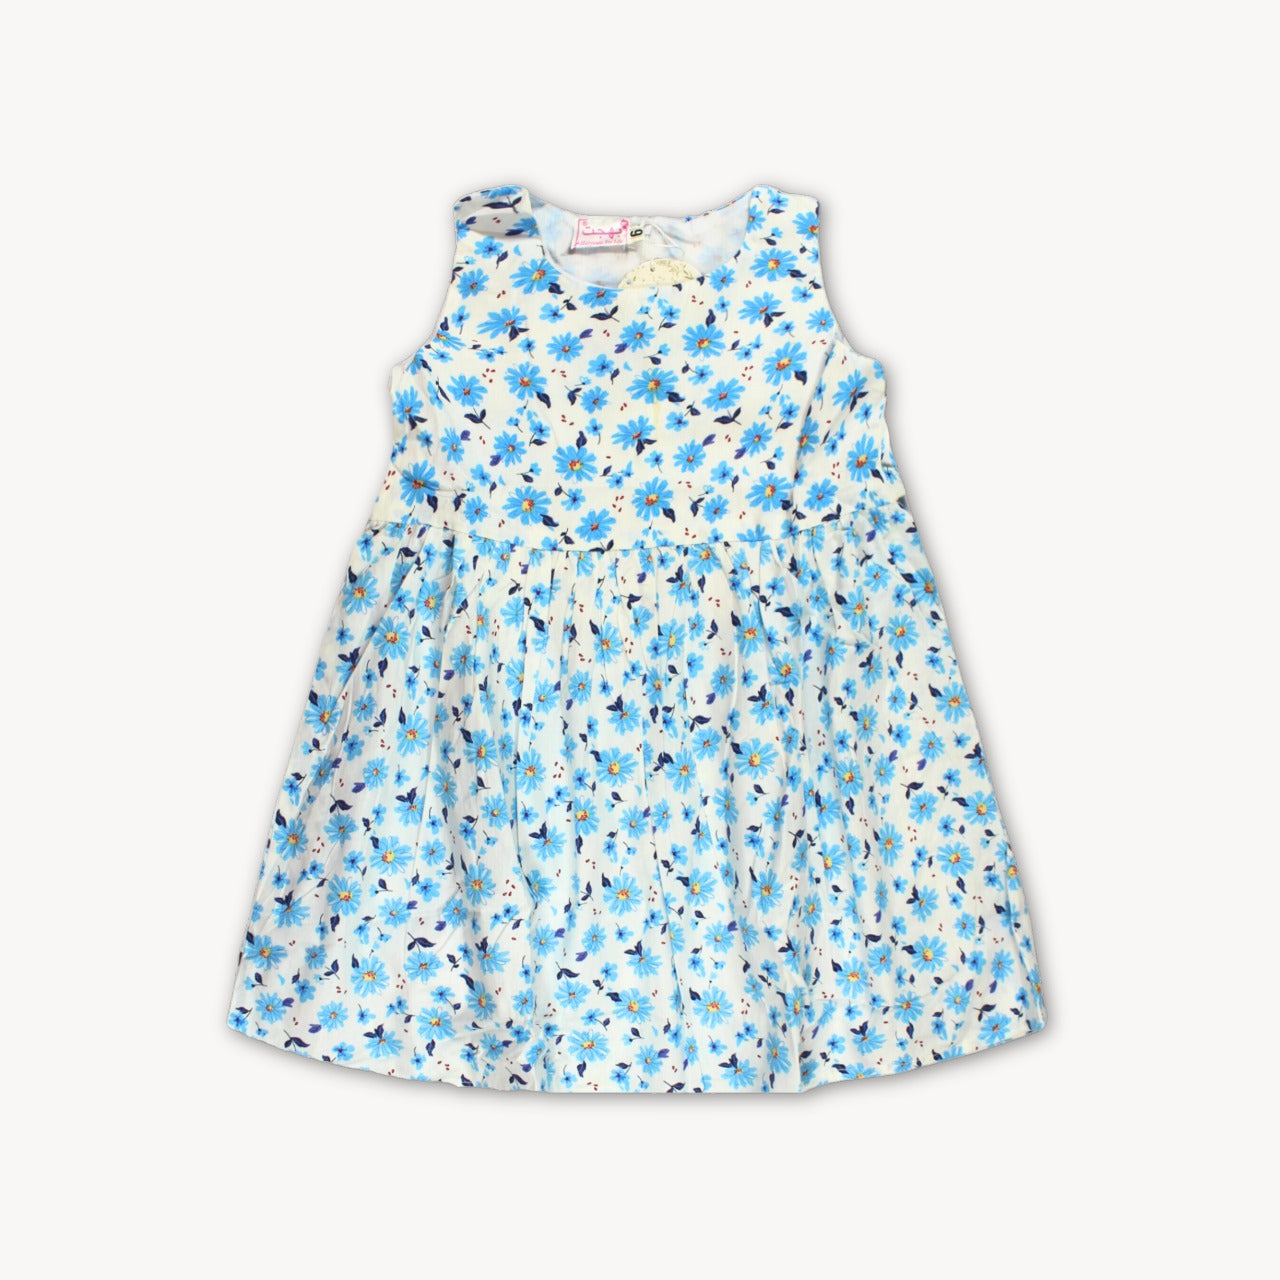 White & Blue Sunflower Summer Printed Cotton Frock